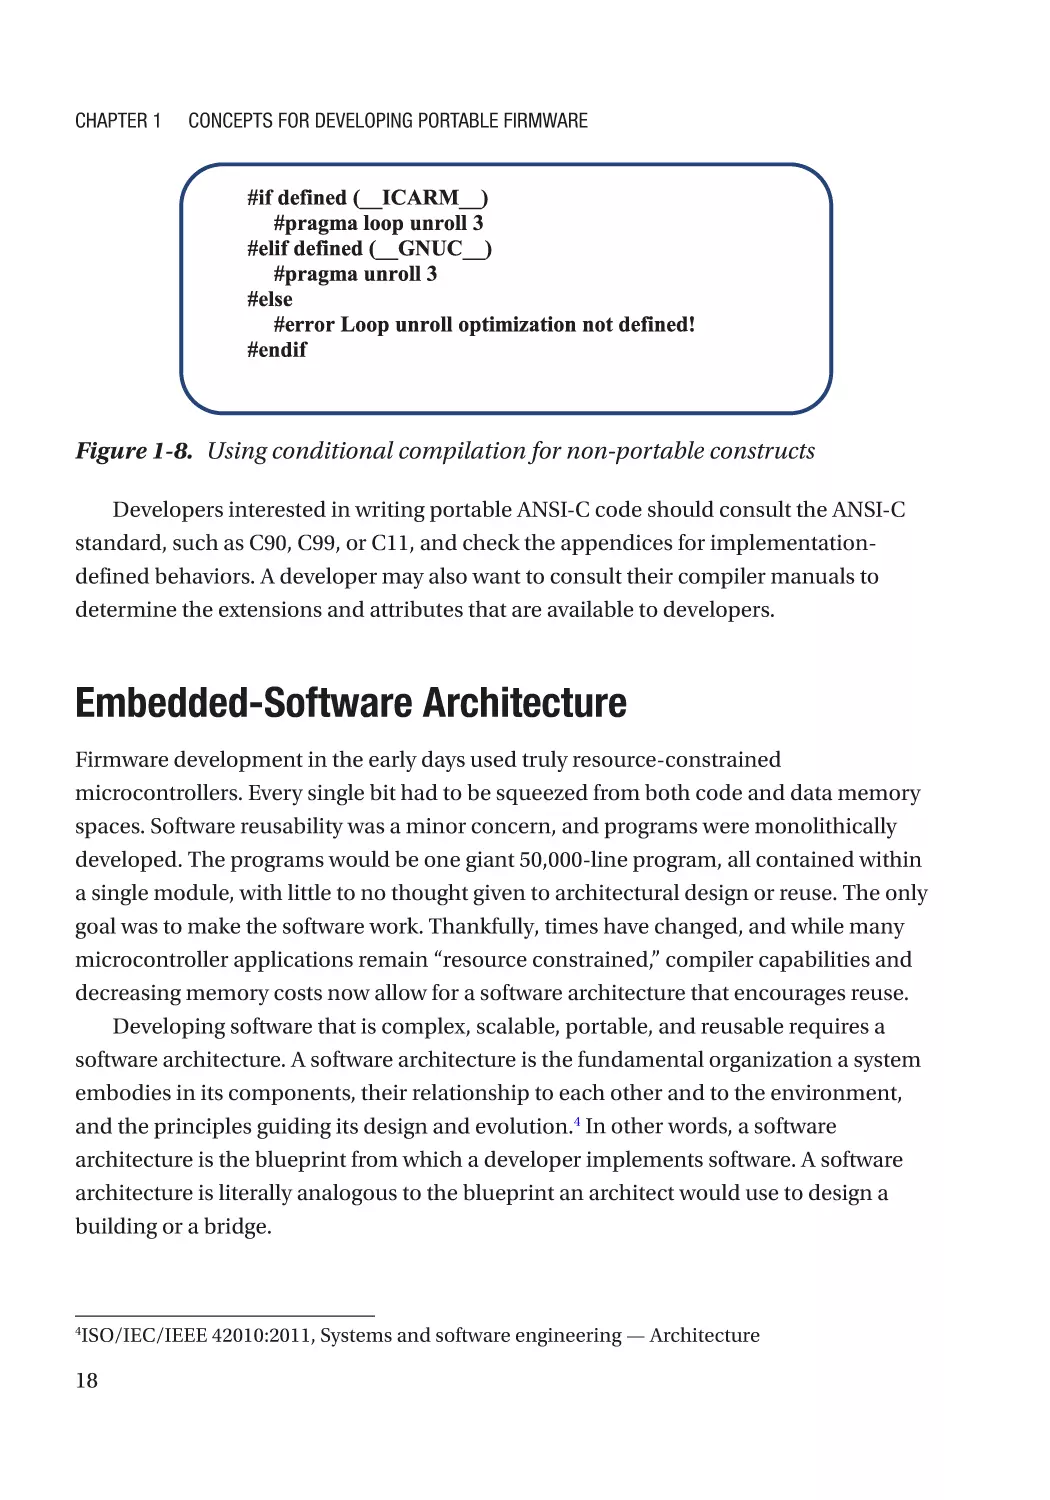 Embedded-Software Architecture